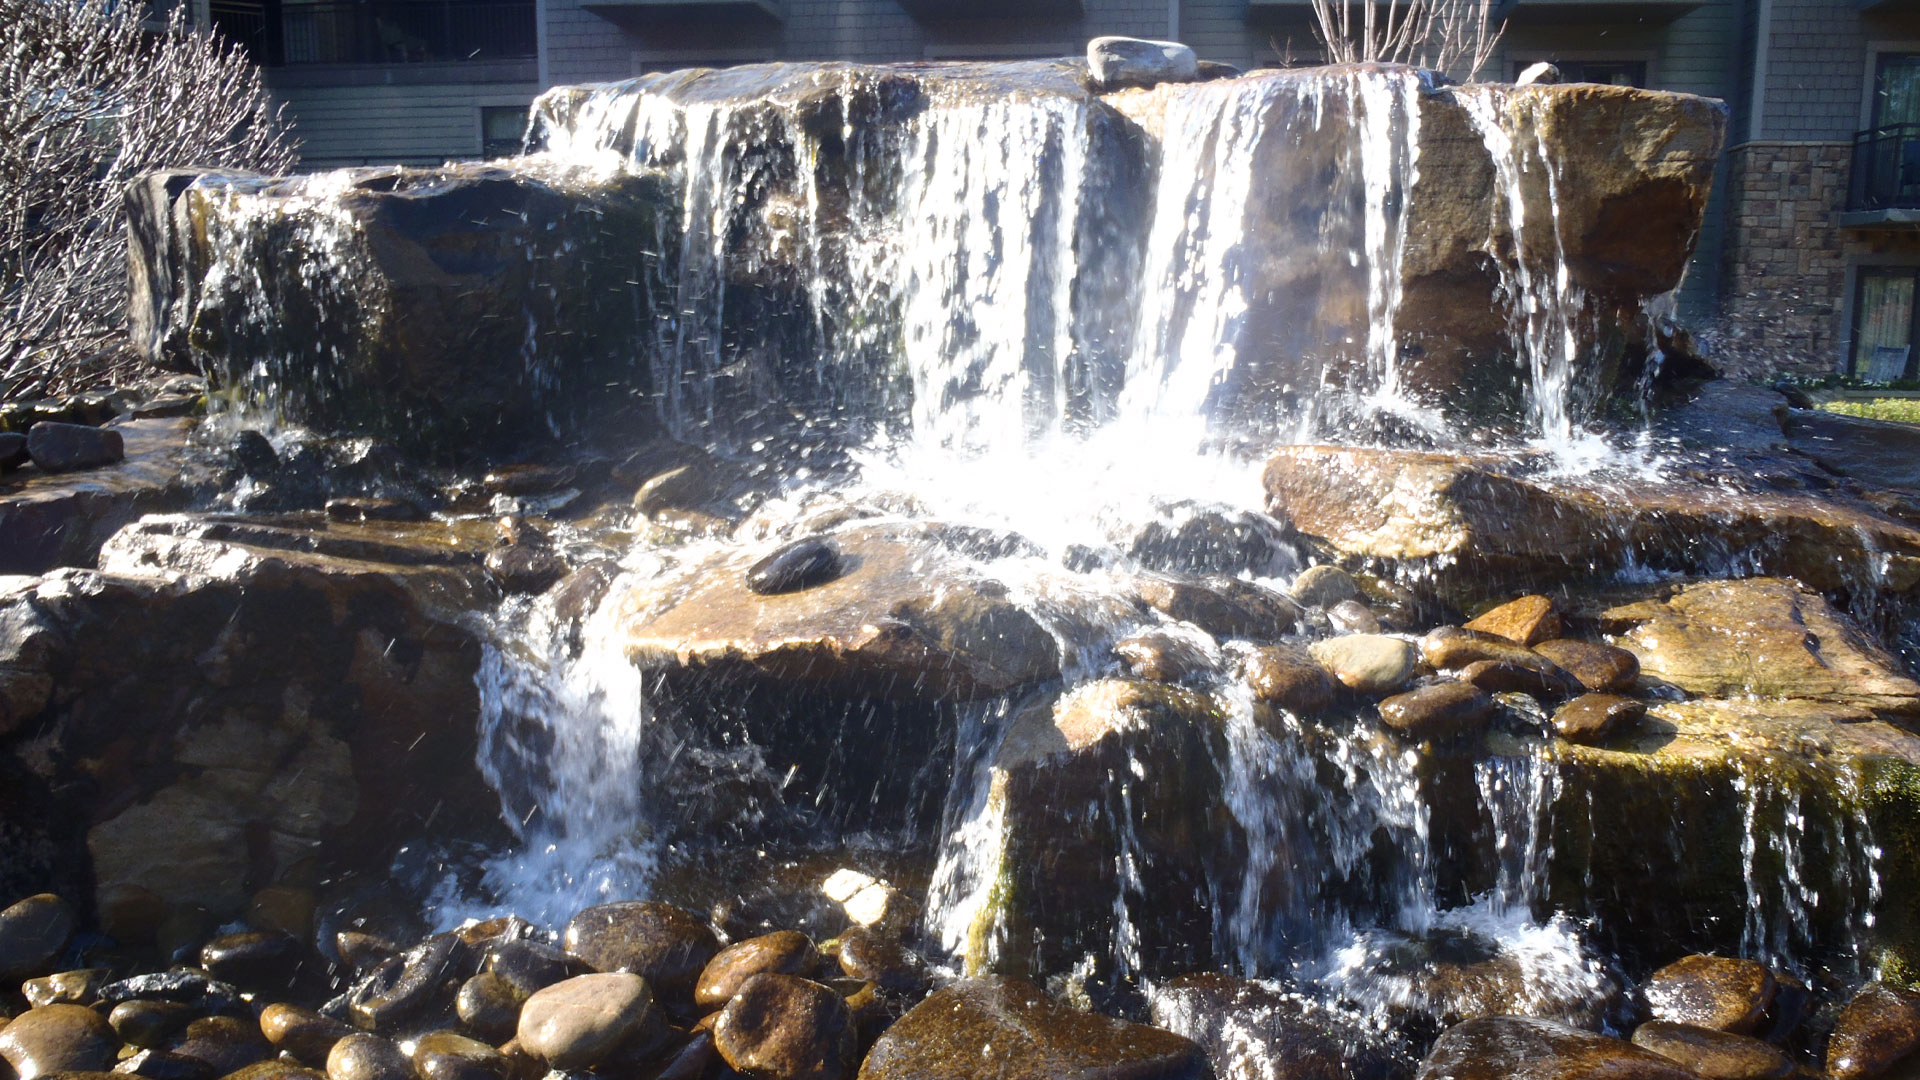 Water fall feature in a landscaping bed at a home in Atlanta, GA.